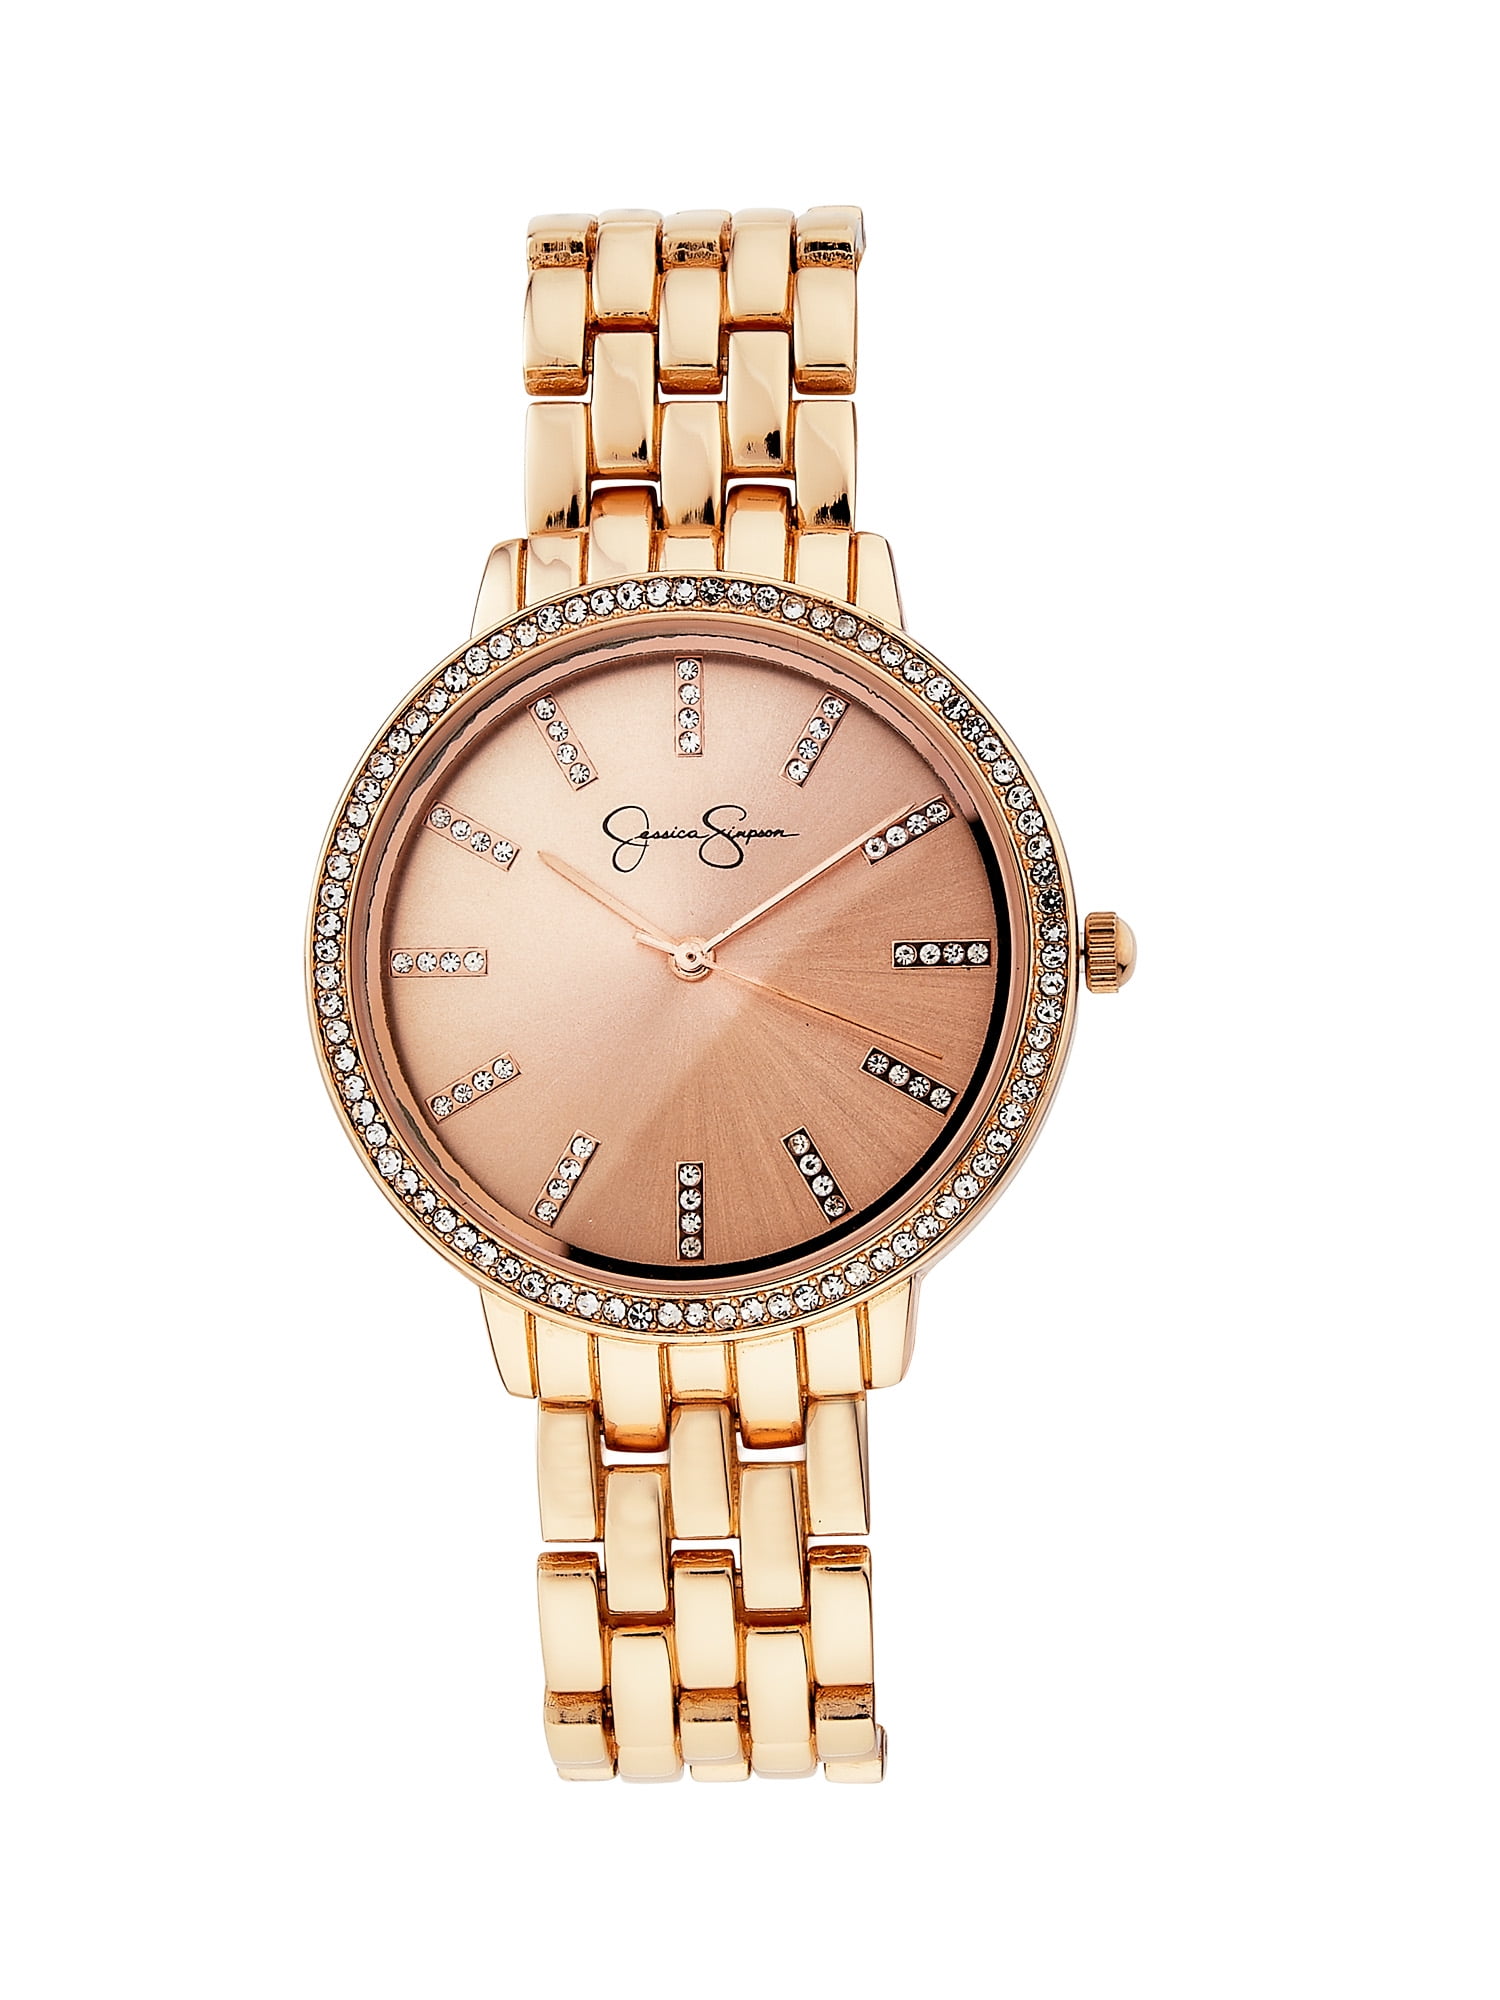 Jessica Simpson Women's Crystal Watch - Rose Gold Tone